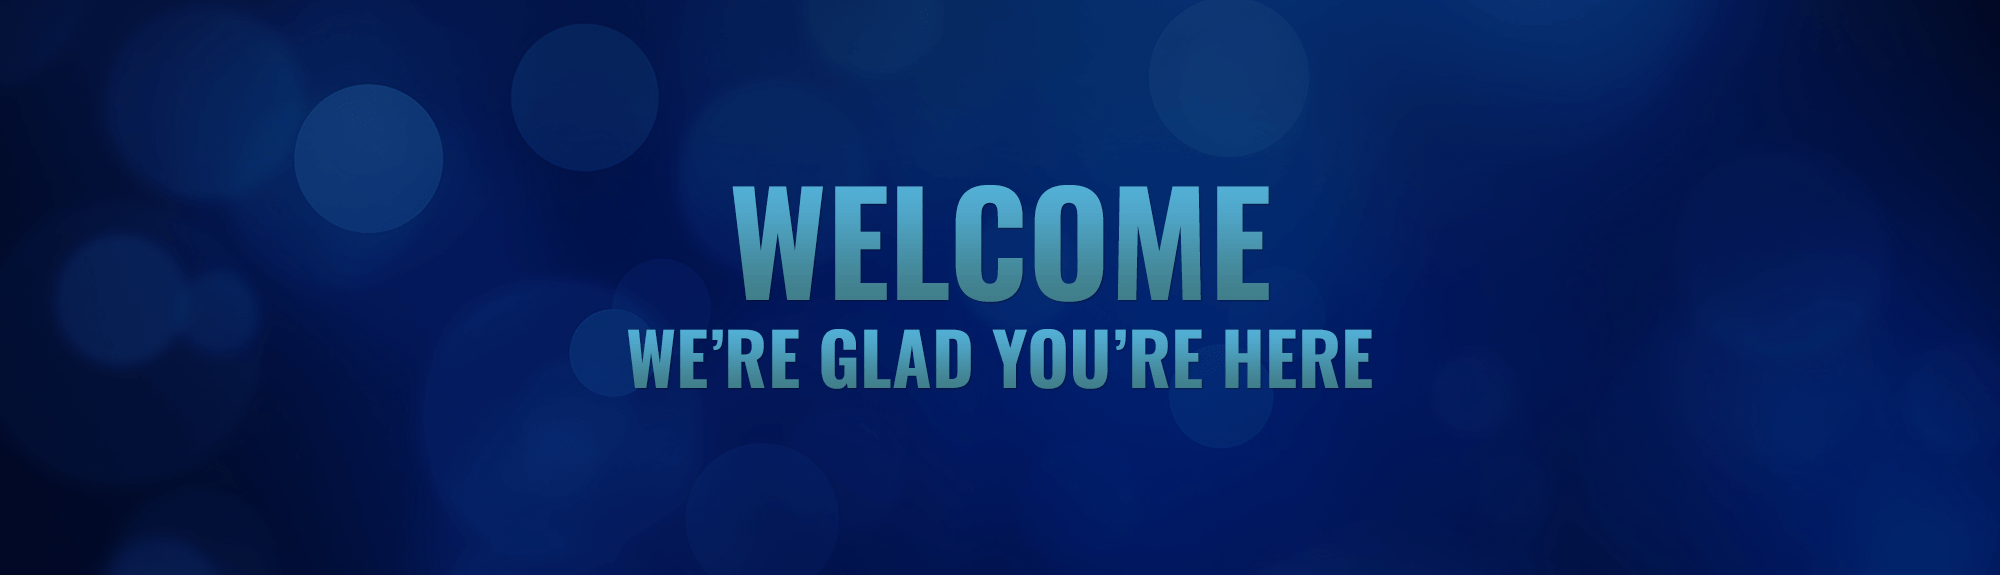 Welcome! We're glad you're here.